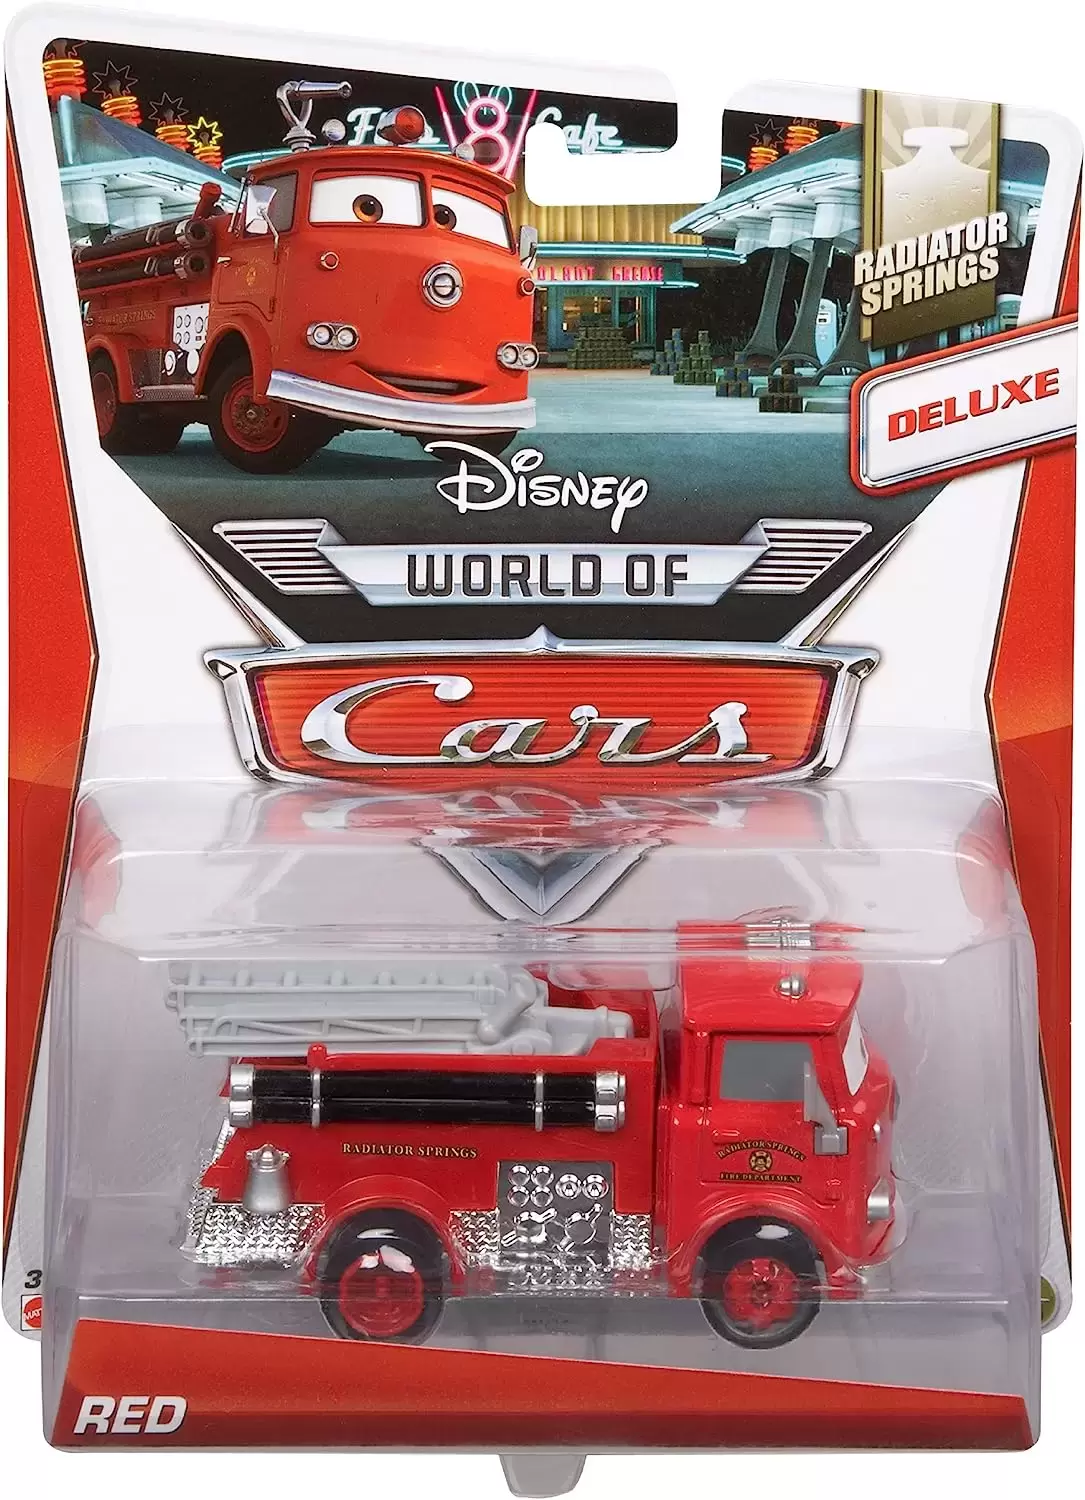 Radiator Springs - Deluxe - Red (World of Cars)